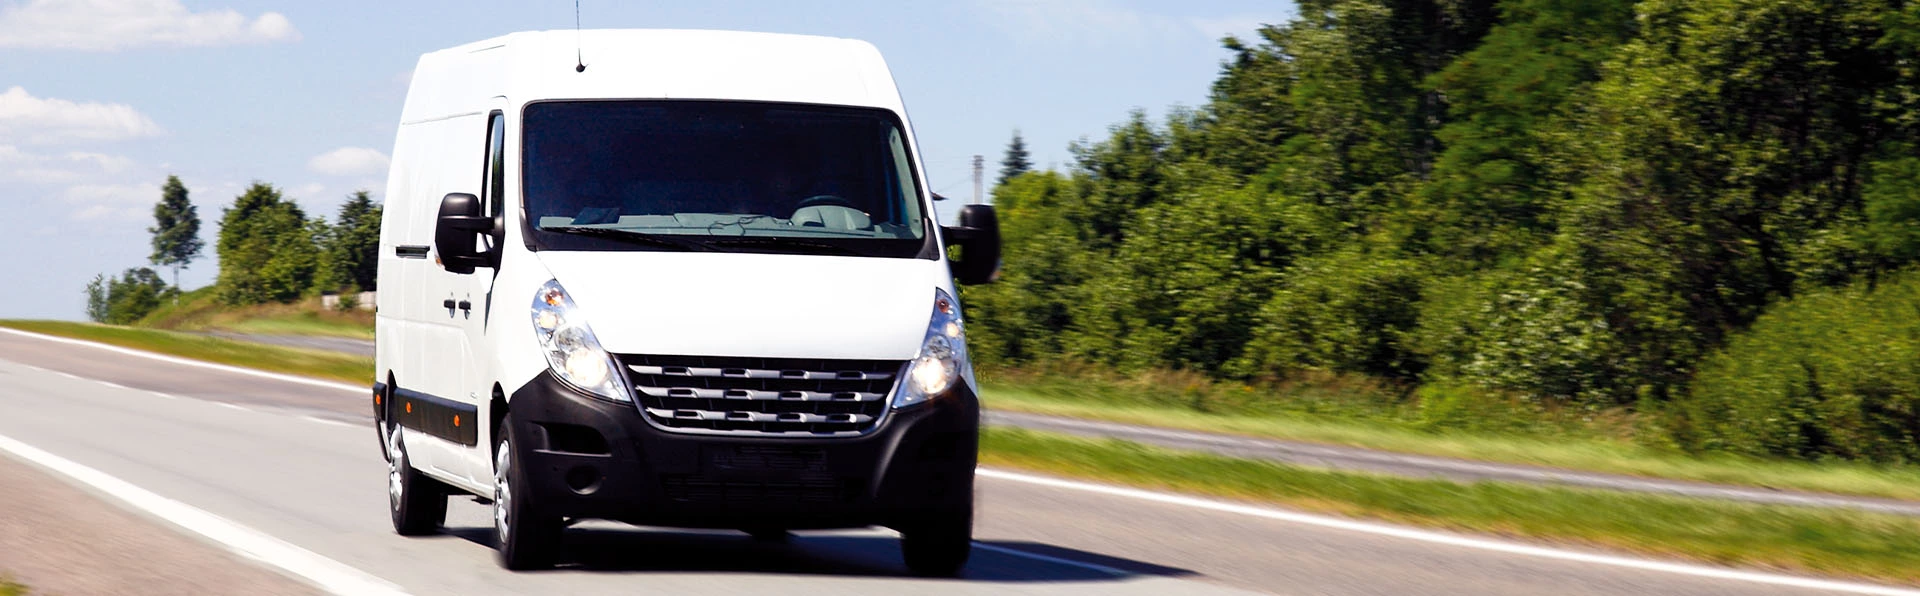 How Smaller Businesses Could Benefit from Van Leasing Deals